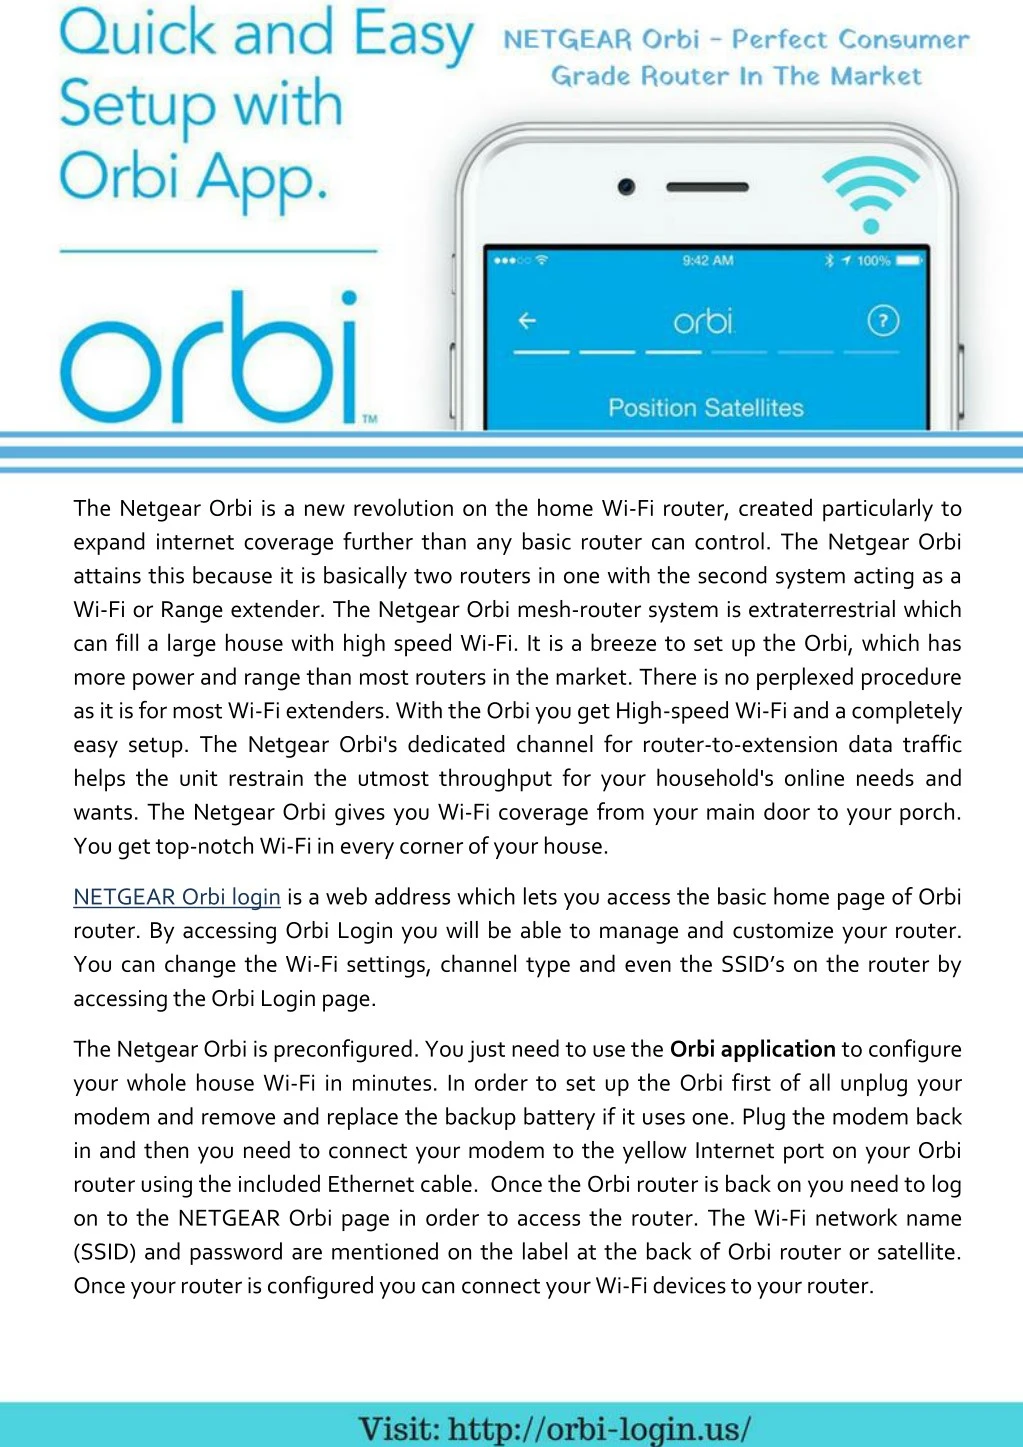 the netgear orbi is a new revolution on the home